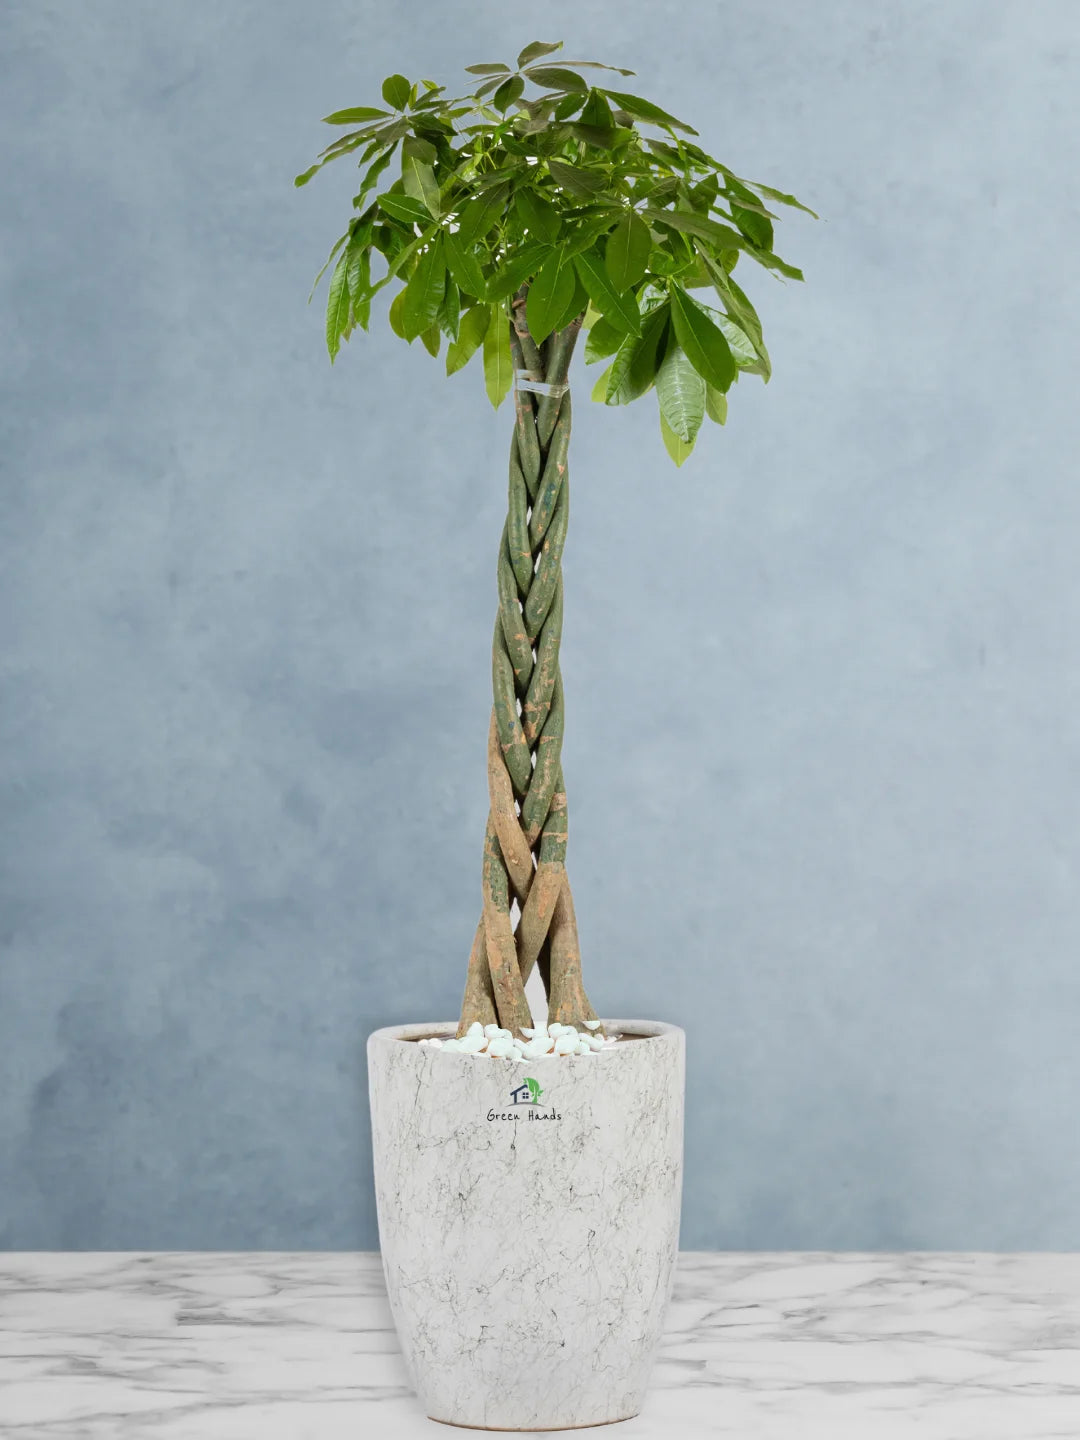 XL Potted Feng Shui Braided Money Tree or Pachira Aquatica: A Symbol of Prosperity